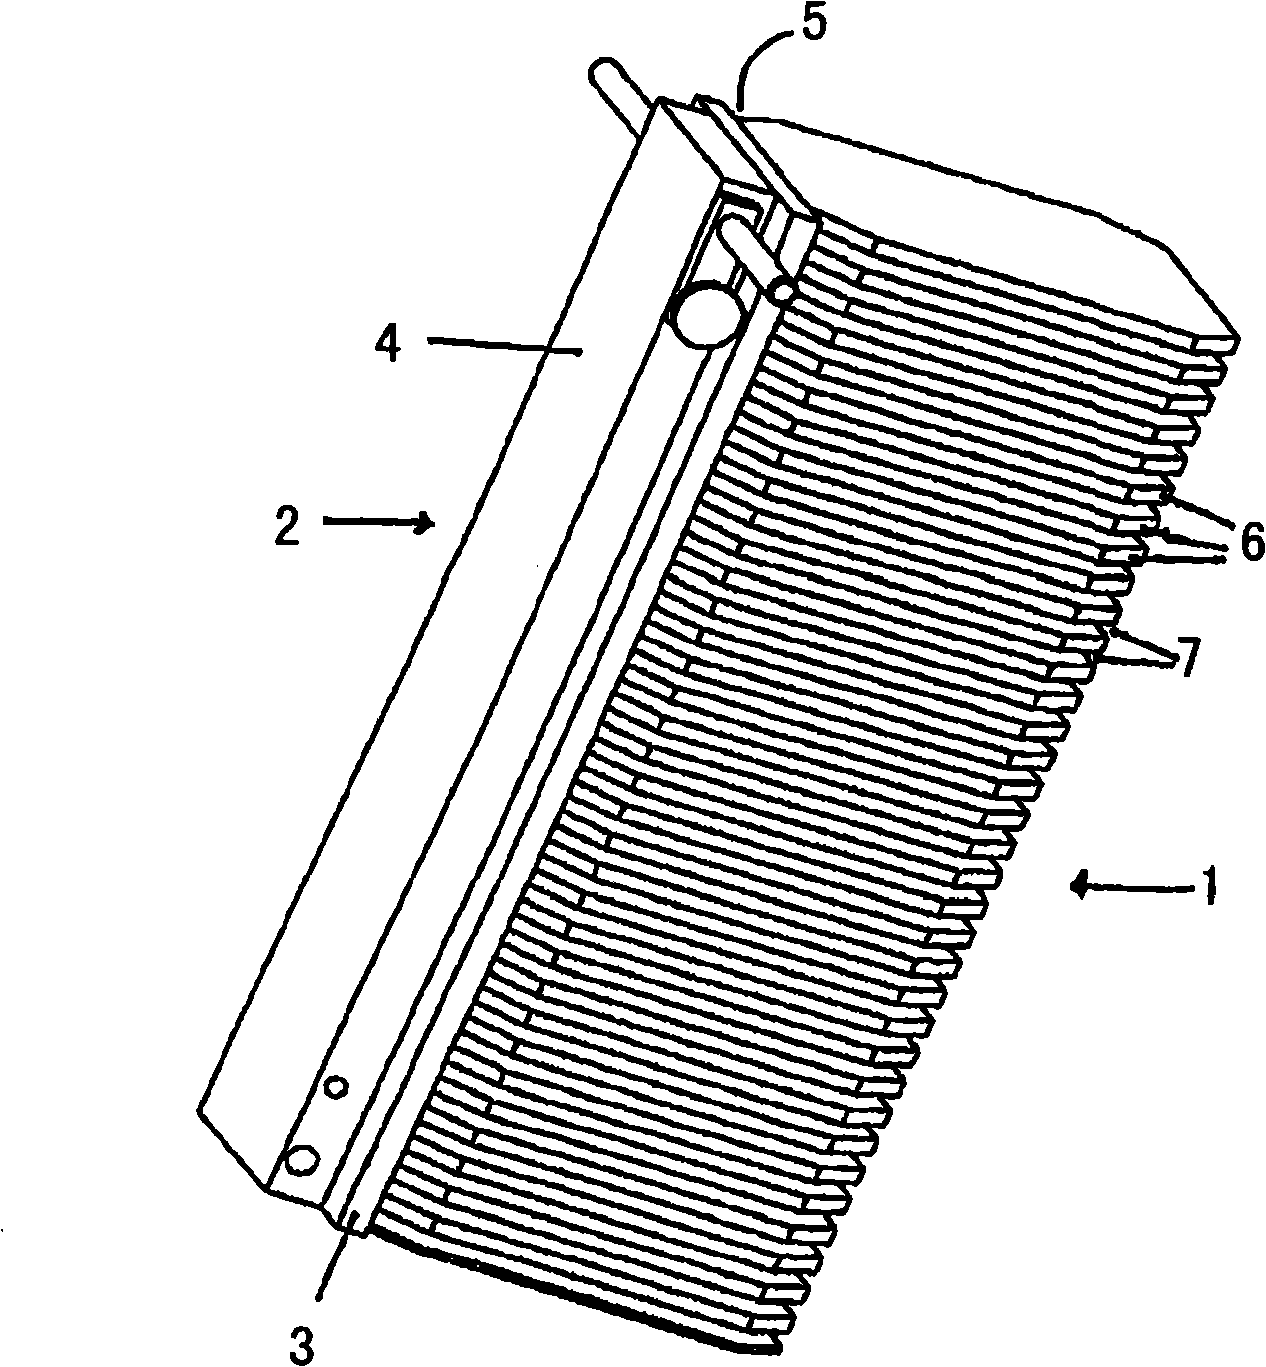 Apparatus and method for cleaning of objects, in particular of thin discs